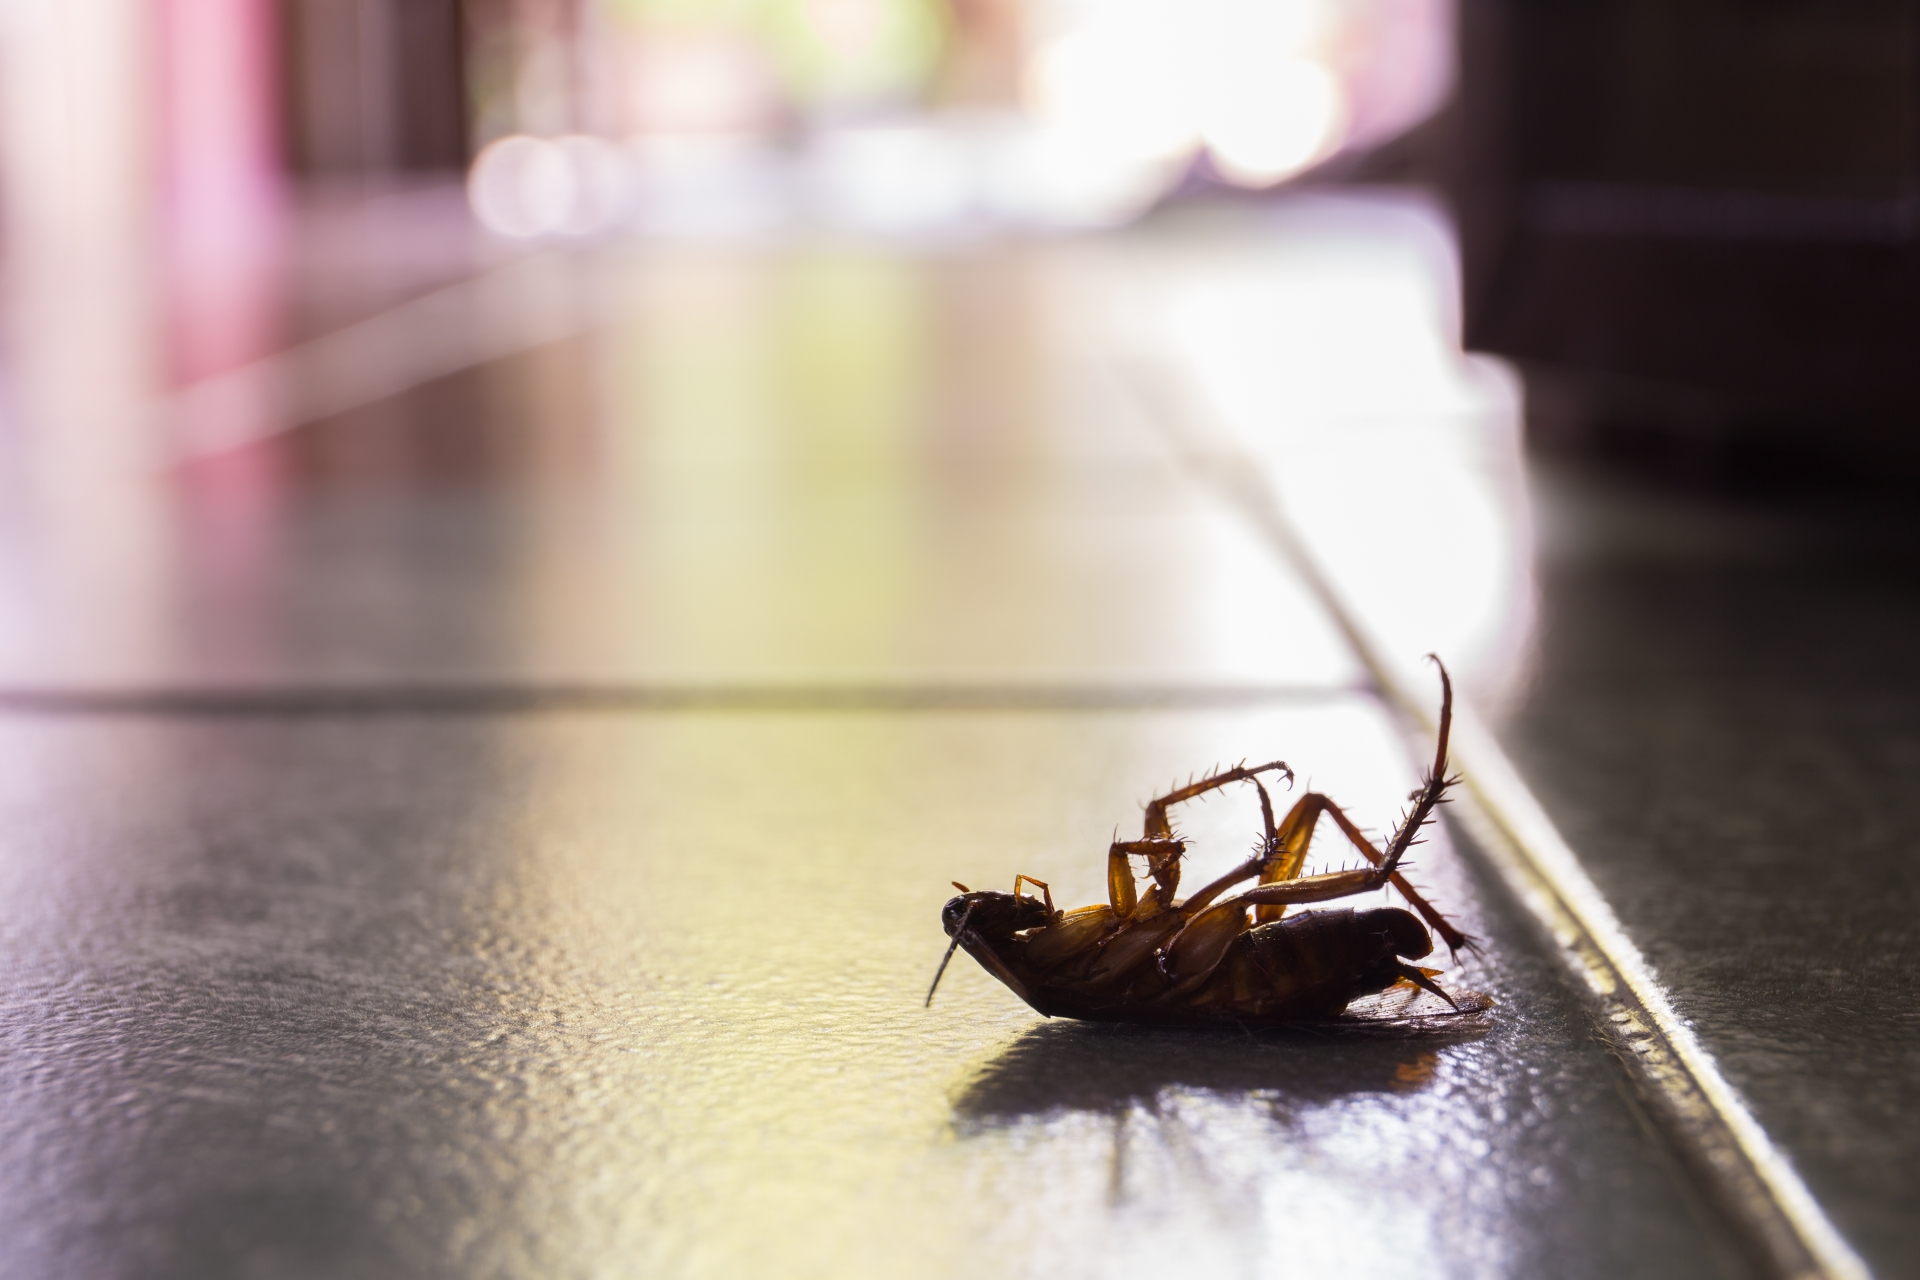 Cockroach Control, Pest Control in Oxhey, South Oxhey, WD19. Call Now 020 8166 9746